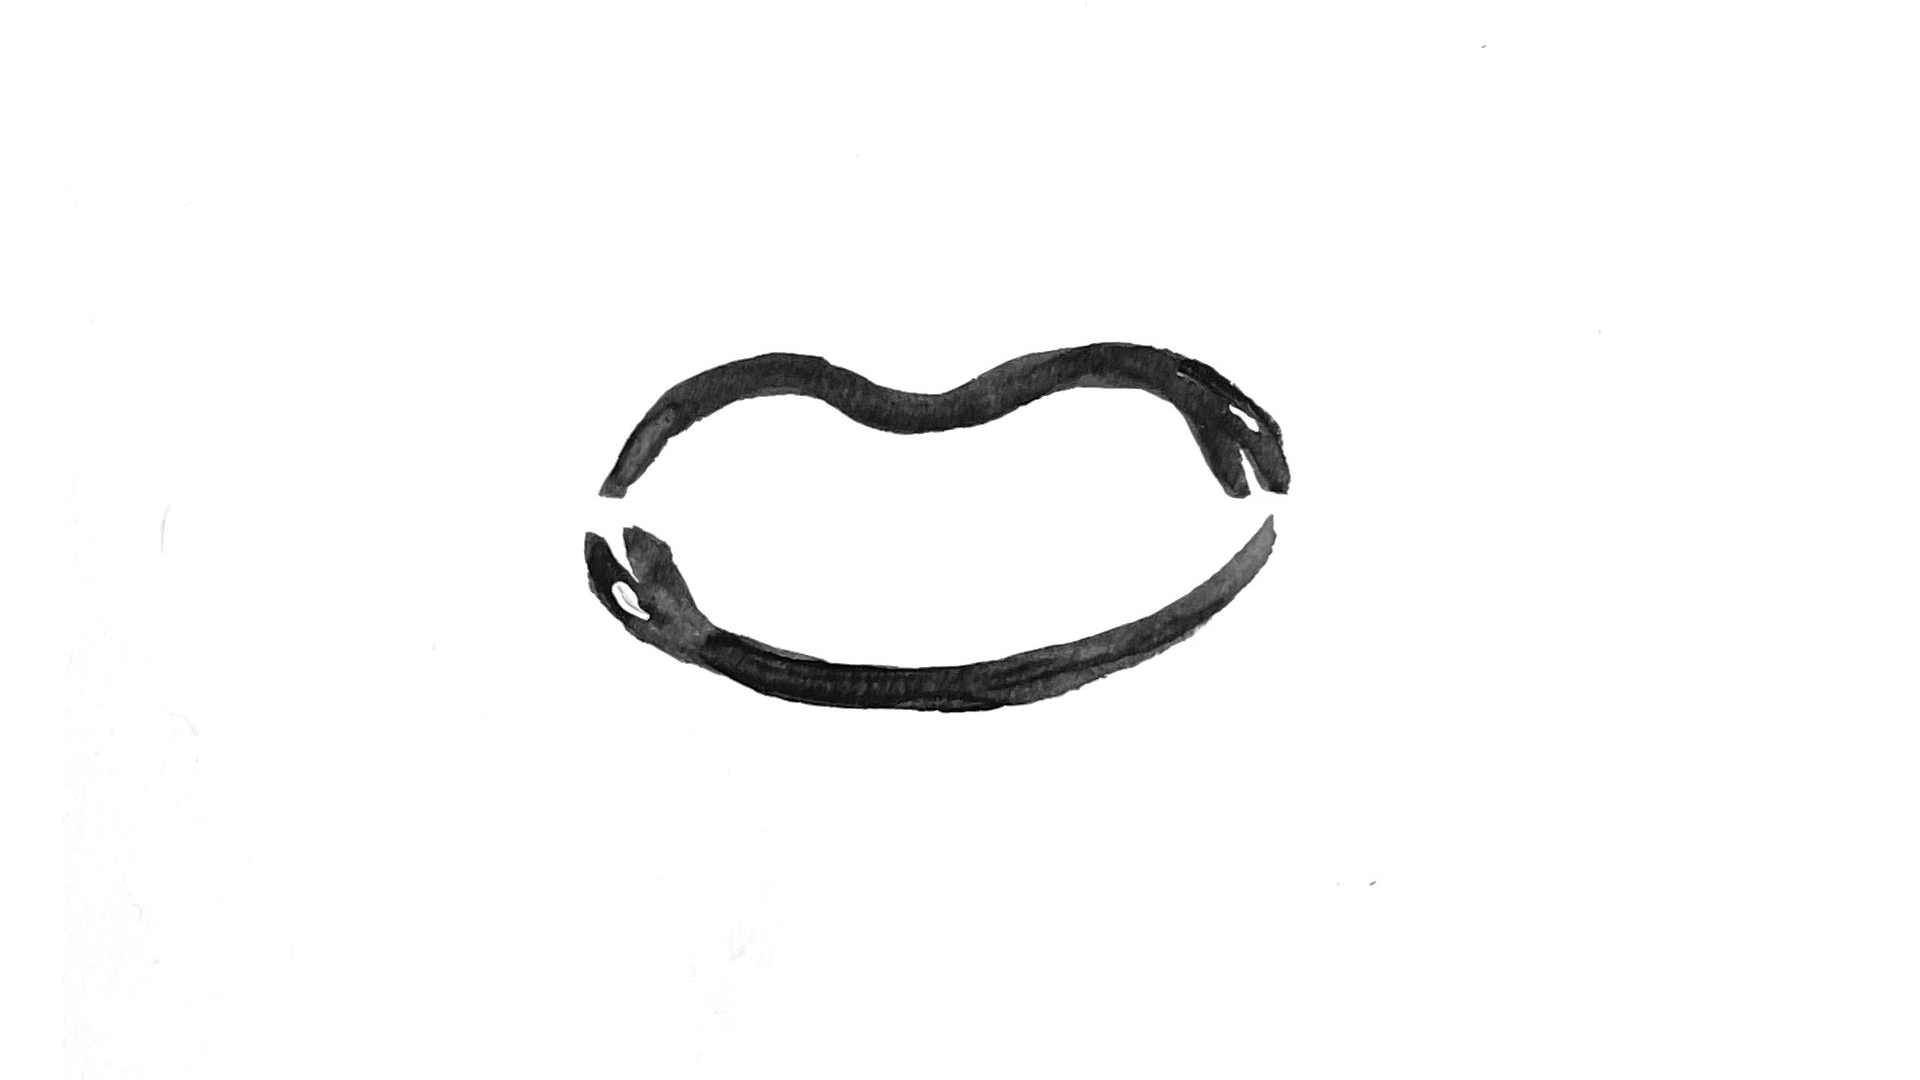 Animated gif of a line drawing of an eye morphing into an image of two snakes laid flat in the shape of a mouth